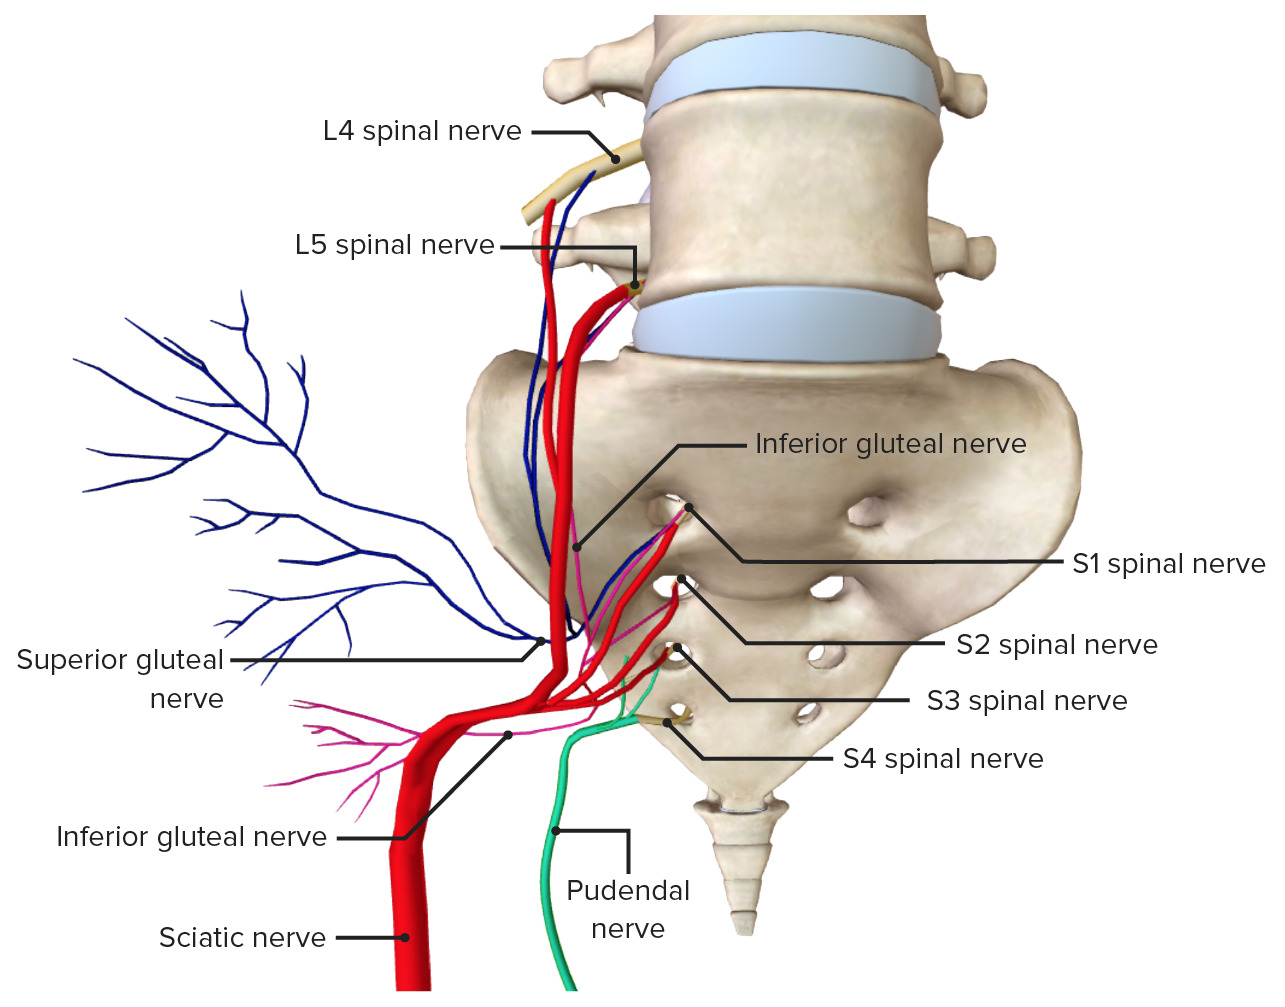 11.3 The Pelvic Girdle and Pelvis – Fundamentals of Anatomy and Physiology